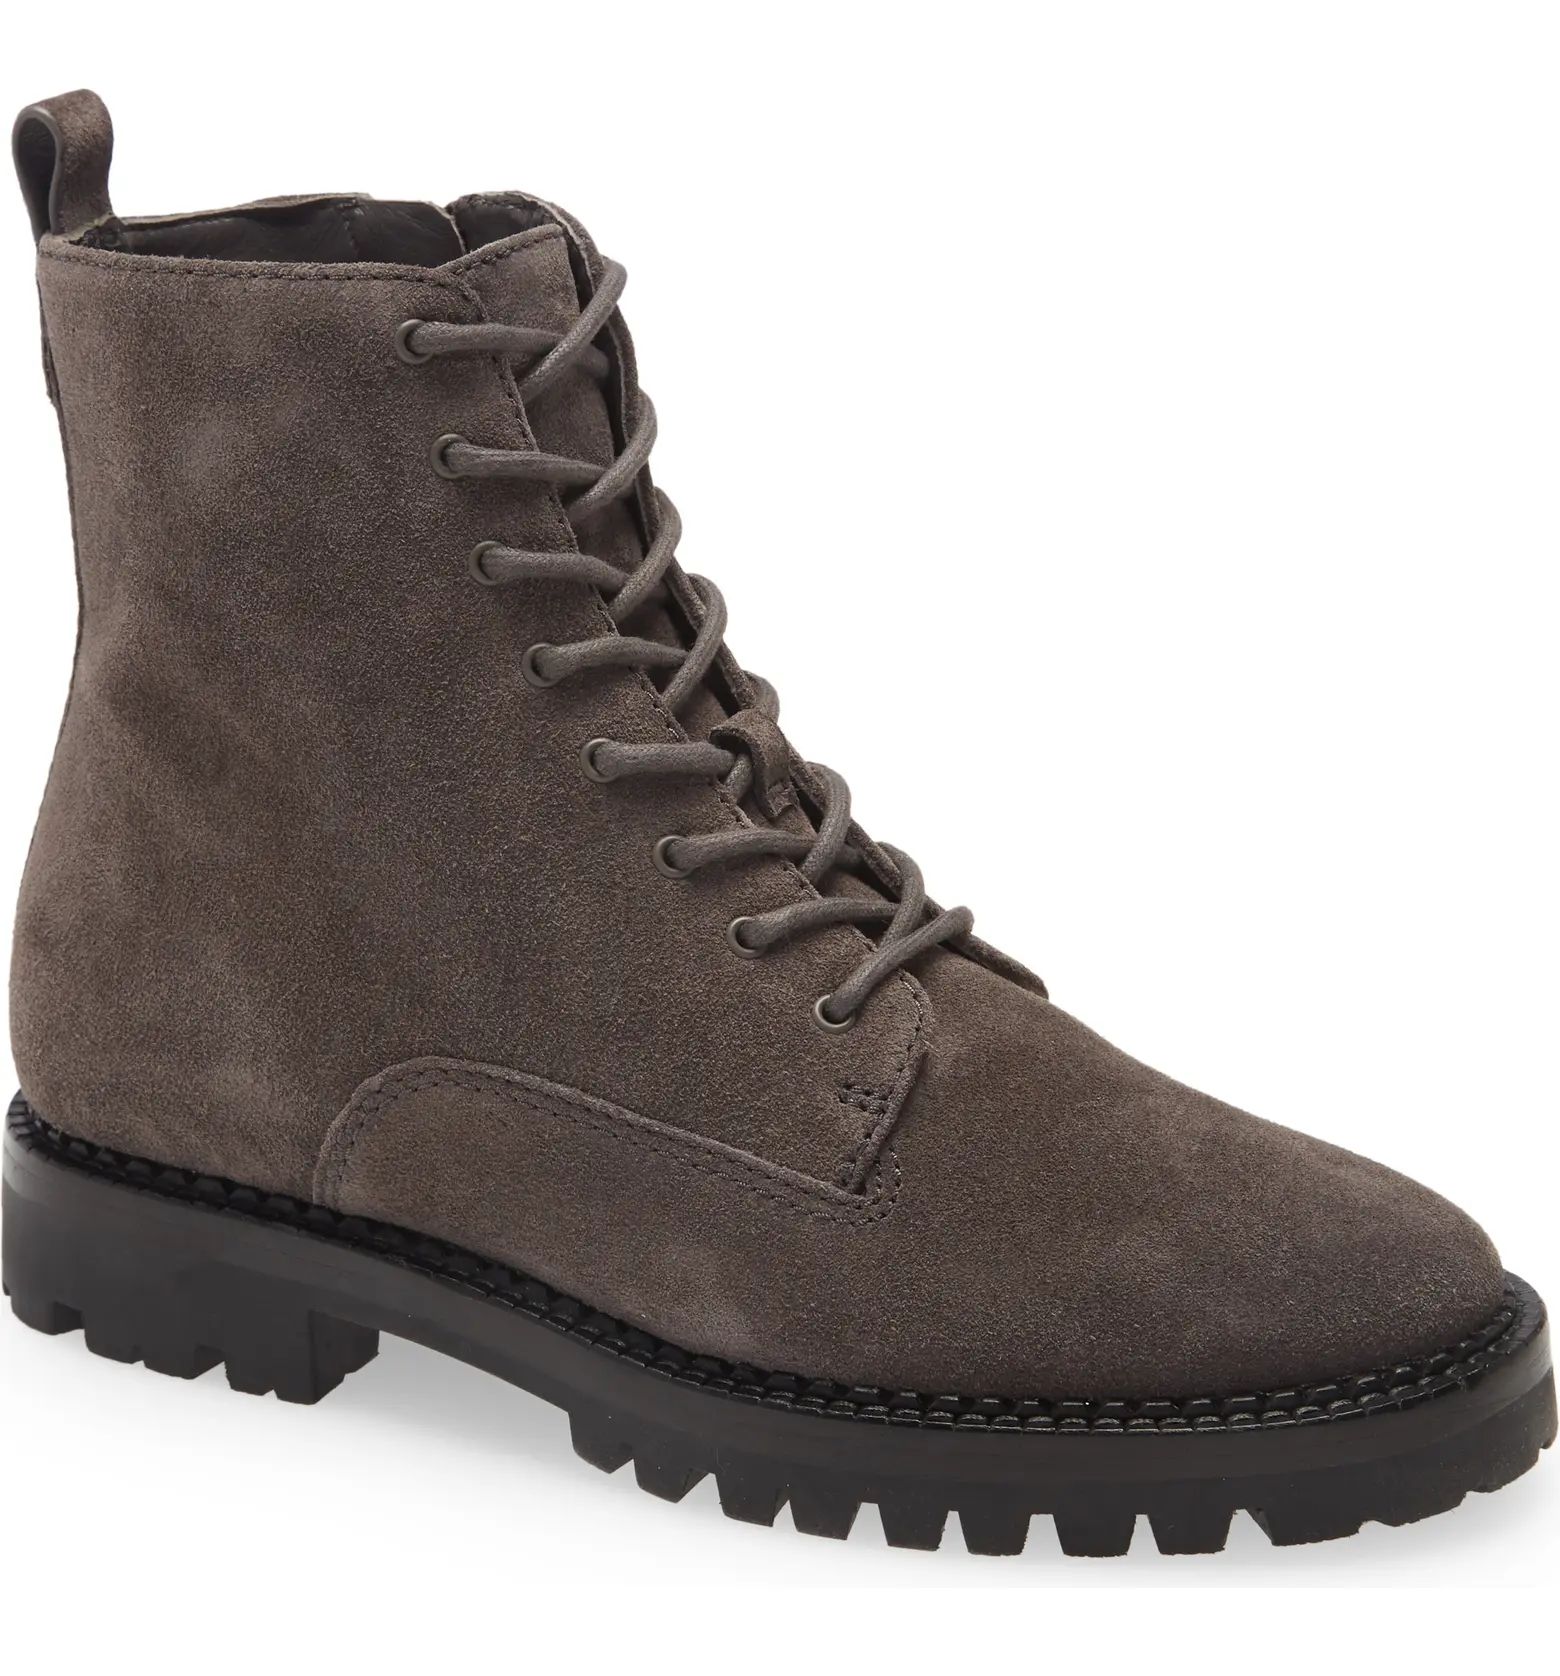 Cabria Lug Water Resistant Lace-Up Boot | Nordstrom